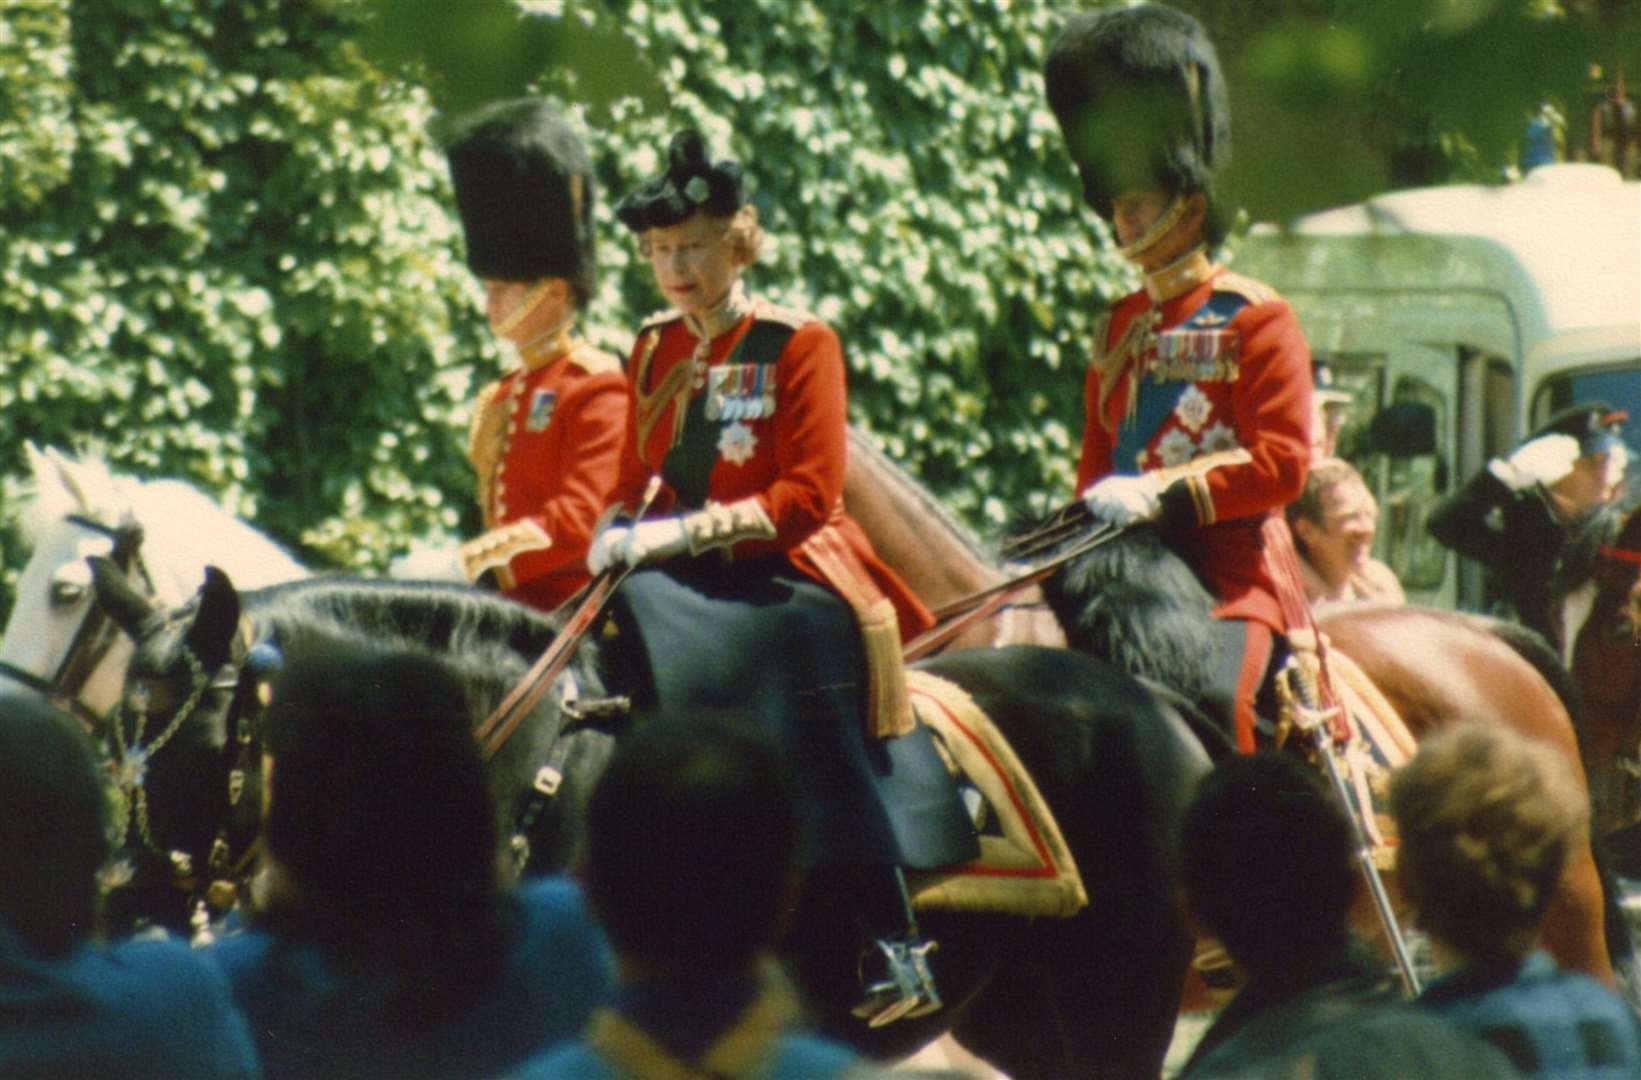 At the time of the incident, the Queen was riding side-saddle through the streets of London during the Trooping of the Colour